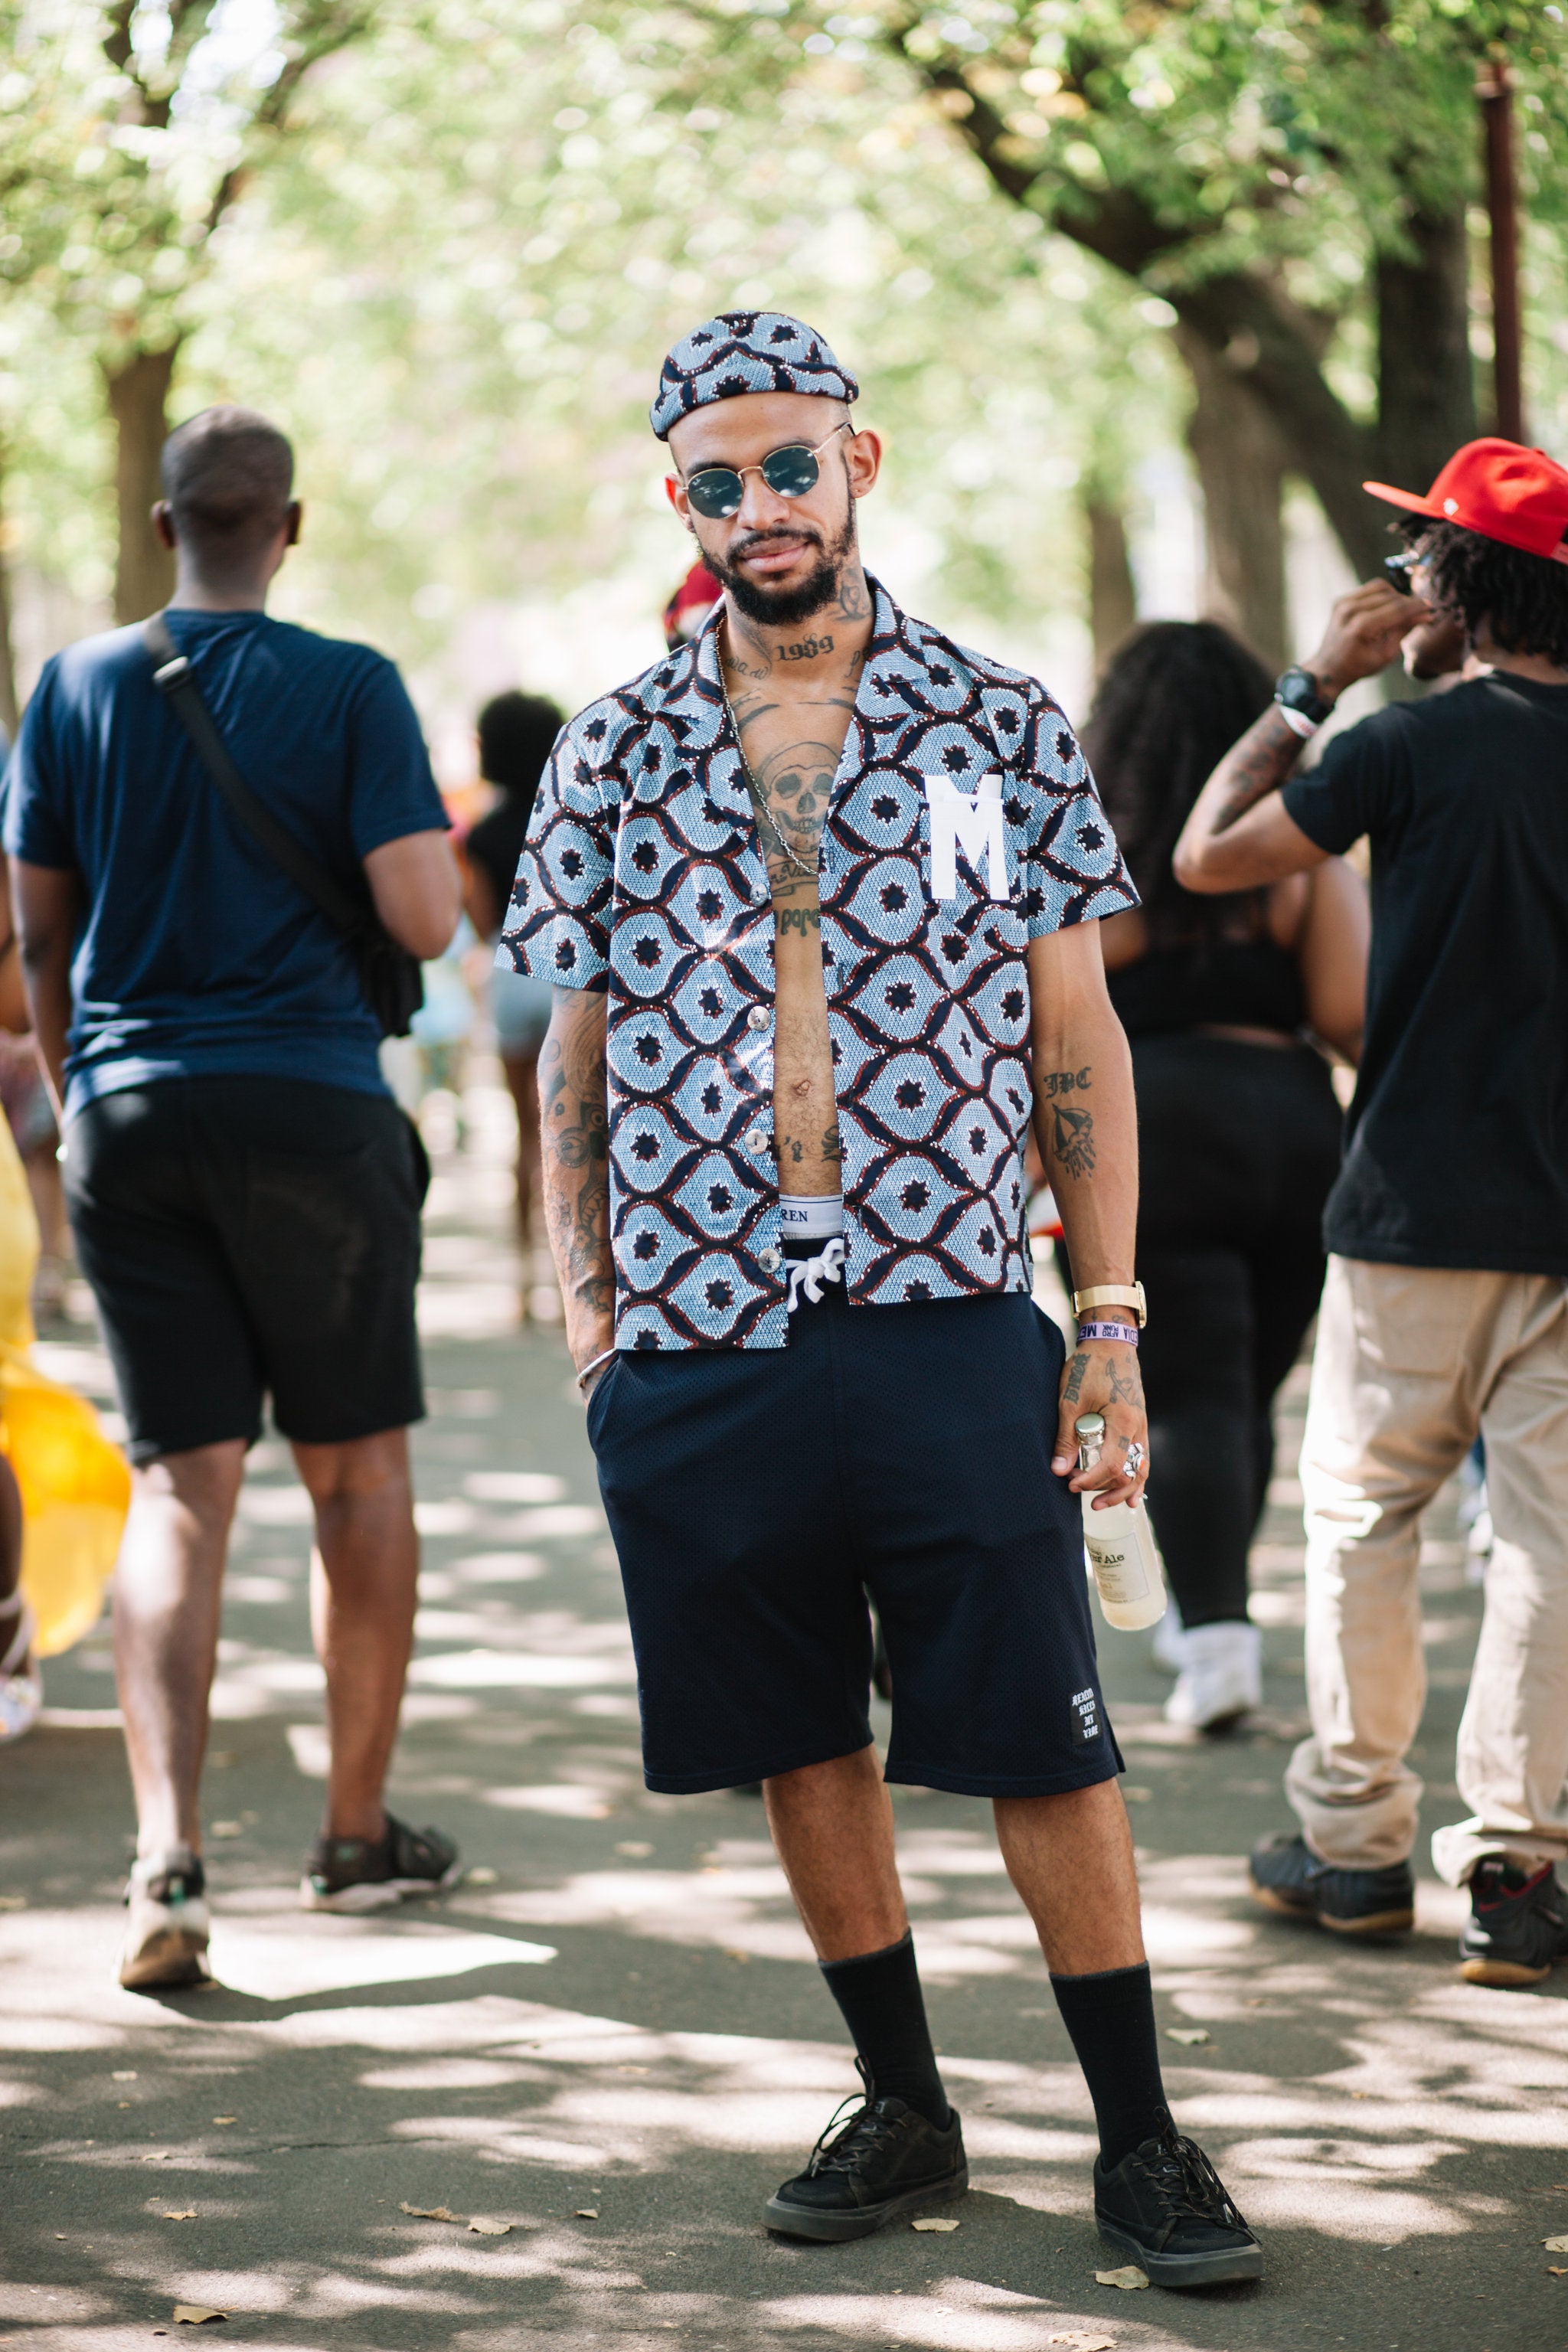 The Fellas Really Brought it at AFROPUNK!
